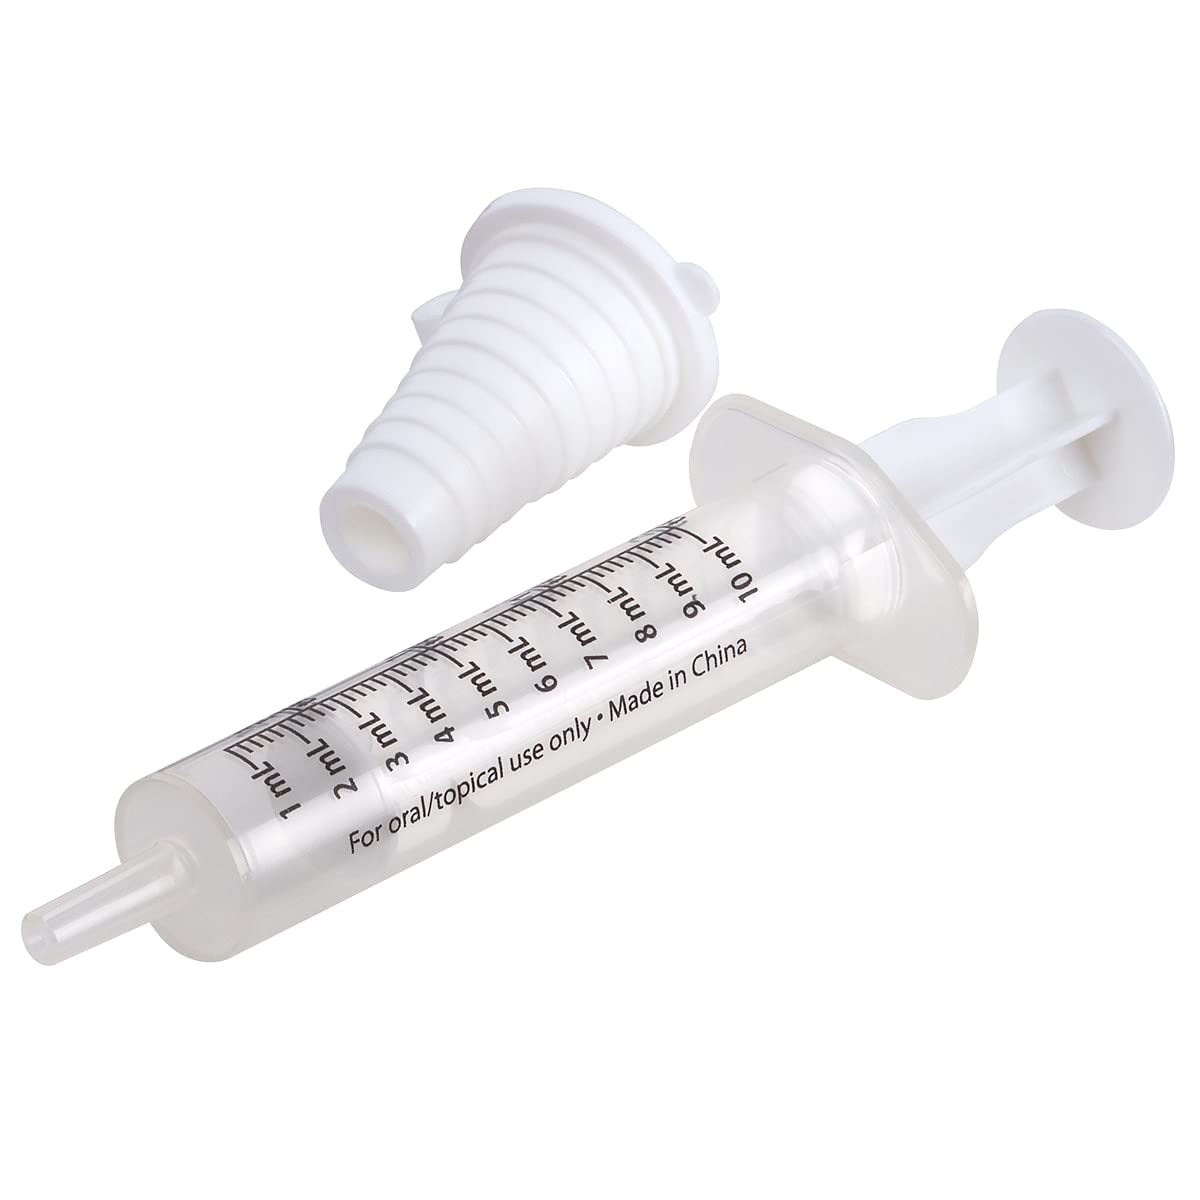 EZY DOSE Kids Baby Oral Syringe & Dispenser Calibrated for Liquid Medicine. 10 mL/2 TSP w/Bottle Adapter  $2.27 + Free Shipping w/ Prime or on $35+